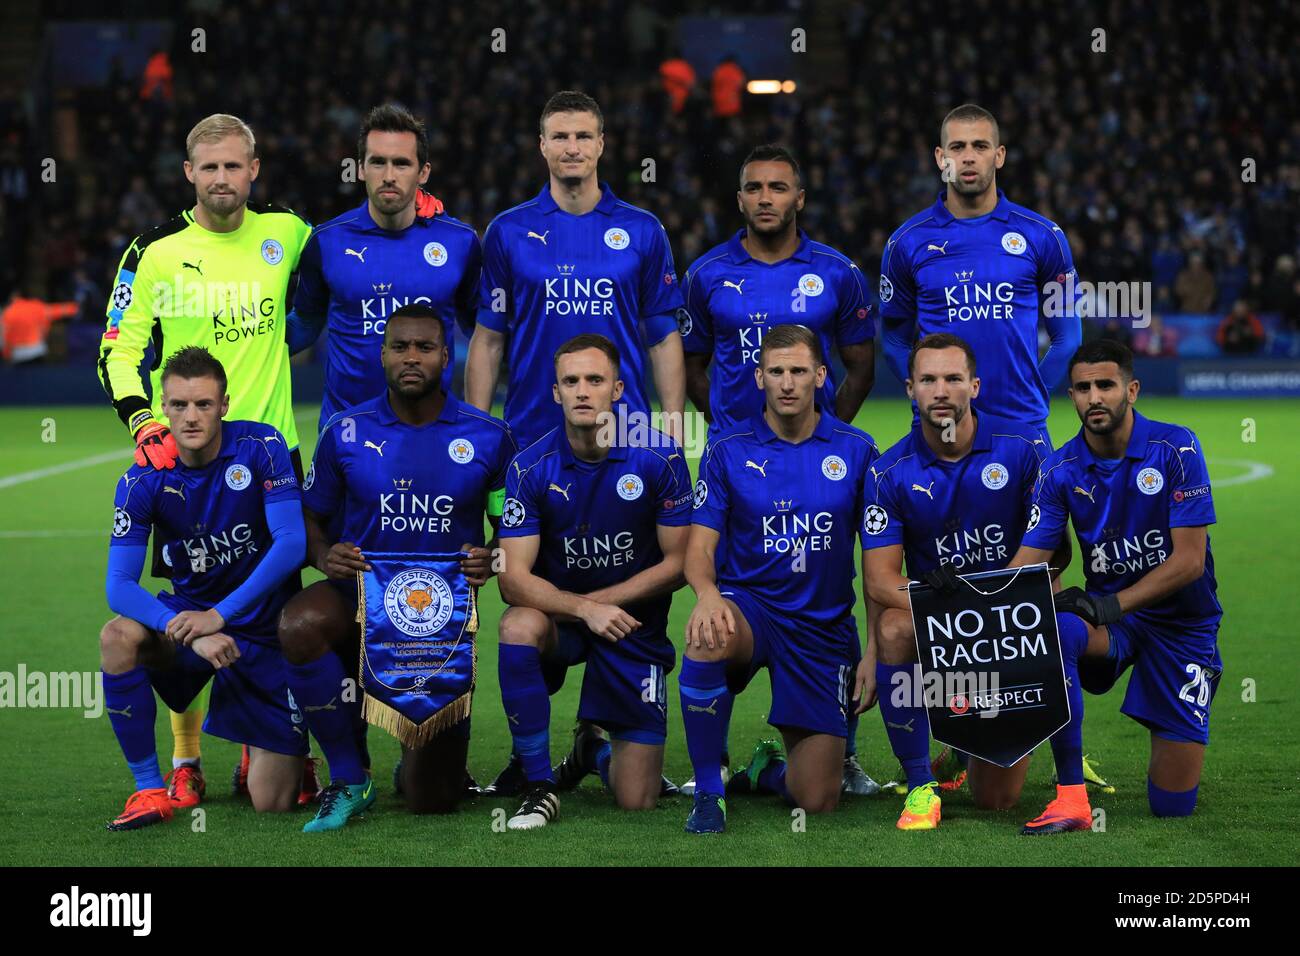 A Leicester City team group photo Stock Photo